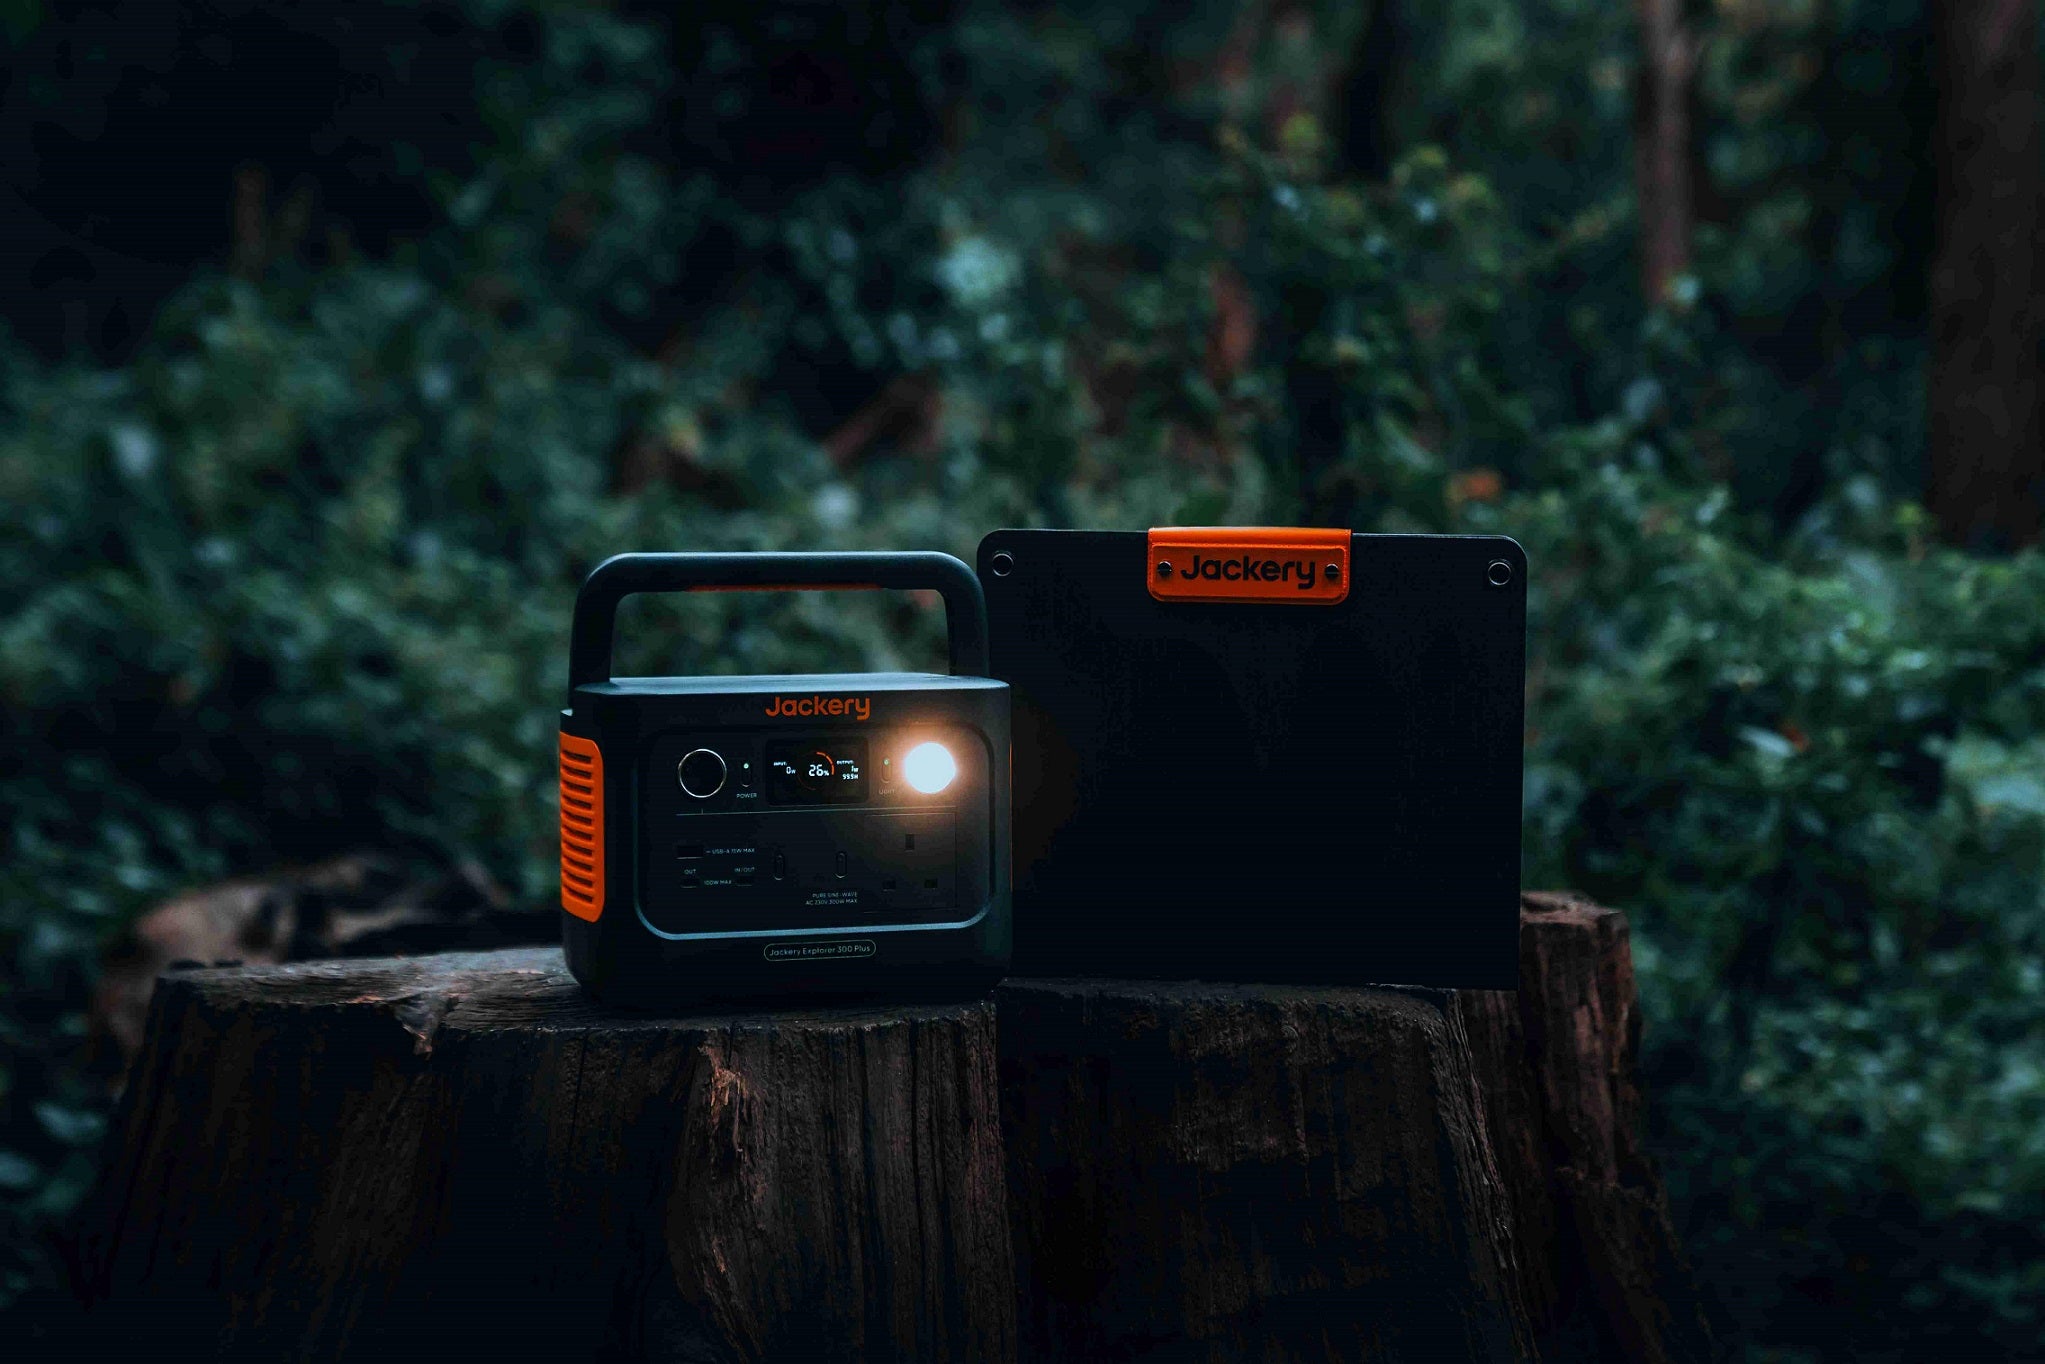 Jackery Power Bank for Your Energy Requirements